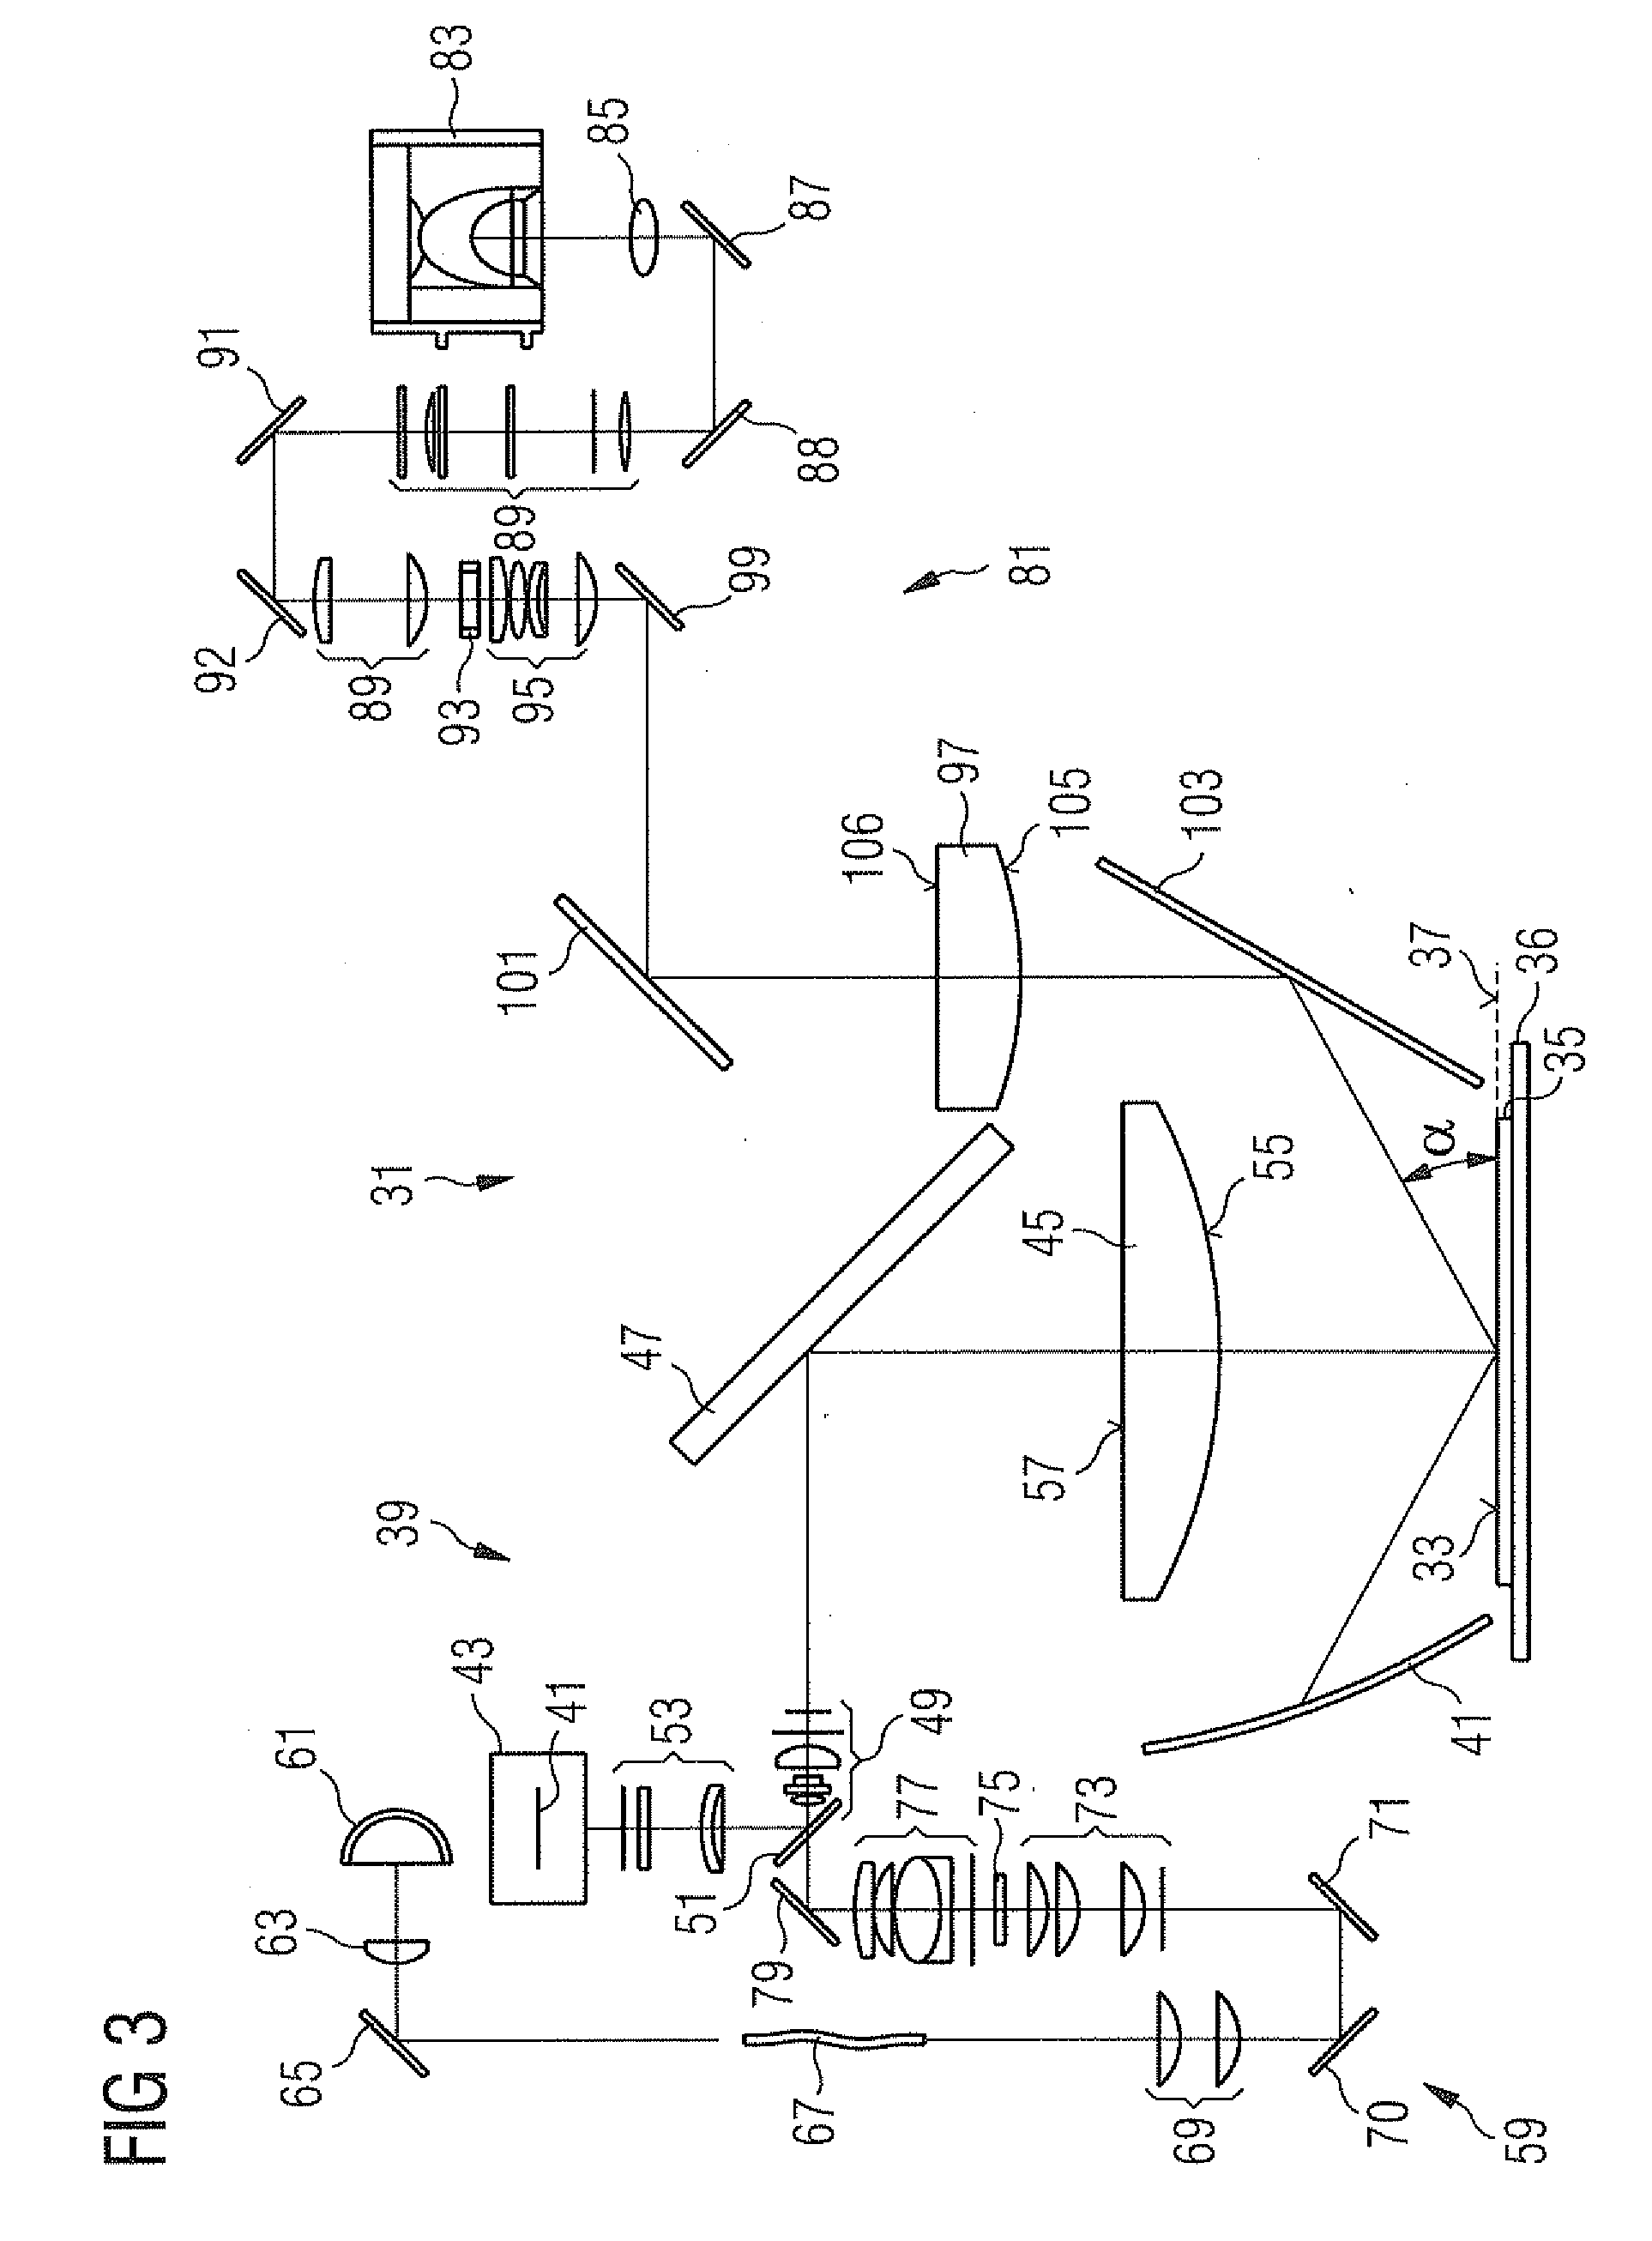 Optical inspection system and method